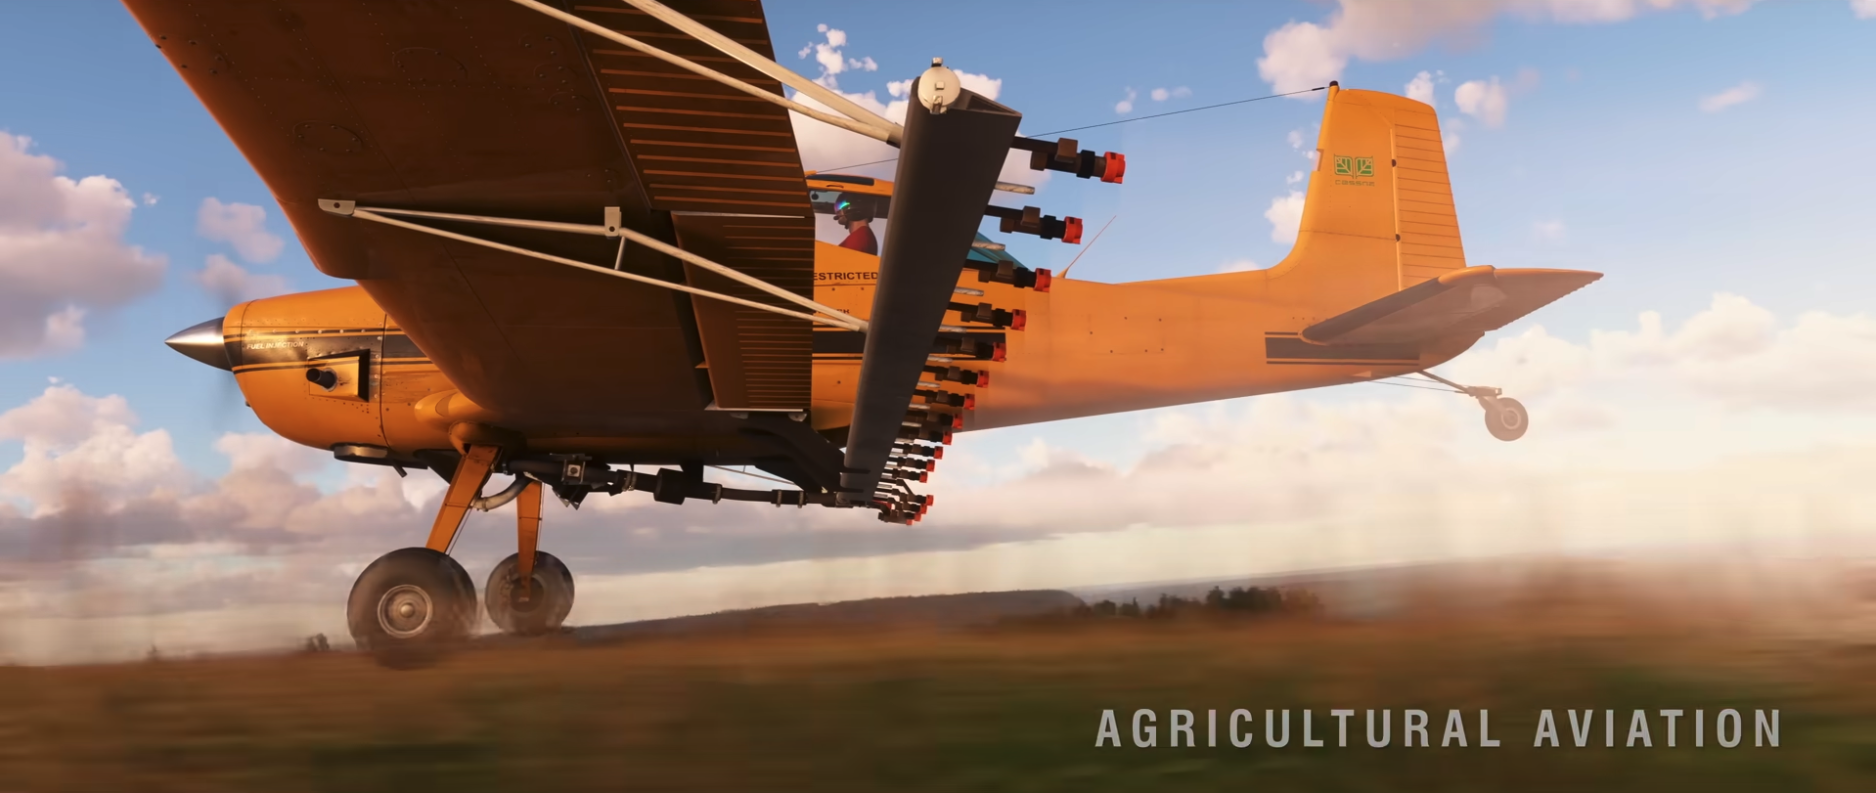 New Microsoft Flight Simulator Set to Feature Ag Aviation and Aerial  Firefighting